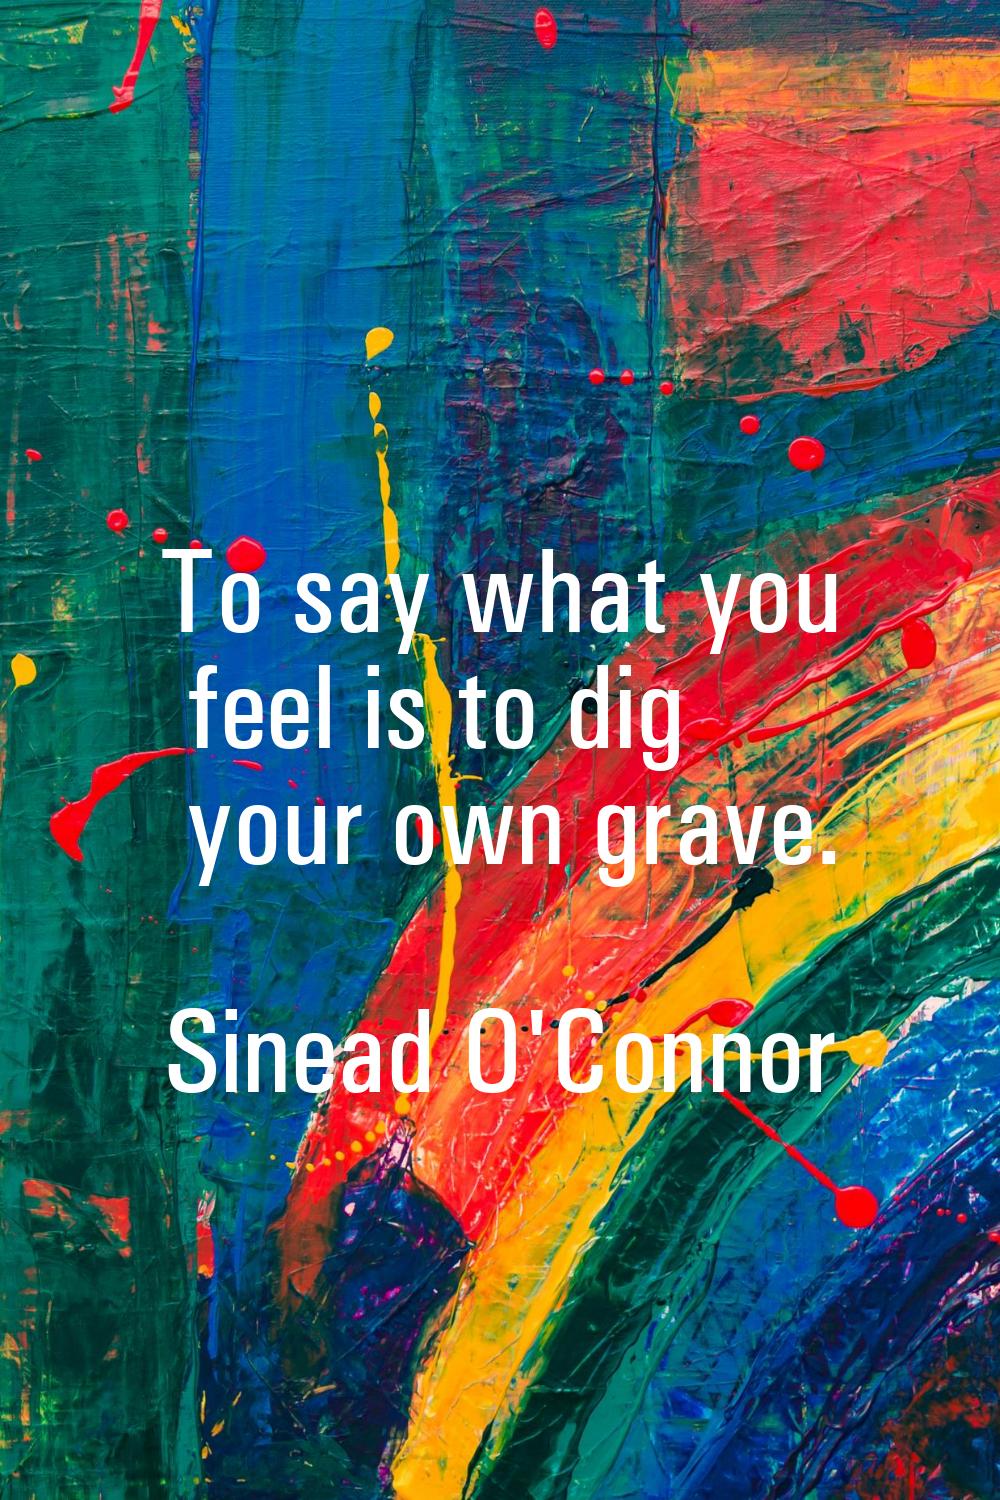 To say what you feel is to dig your own grave.